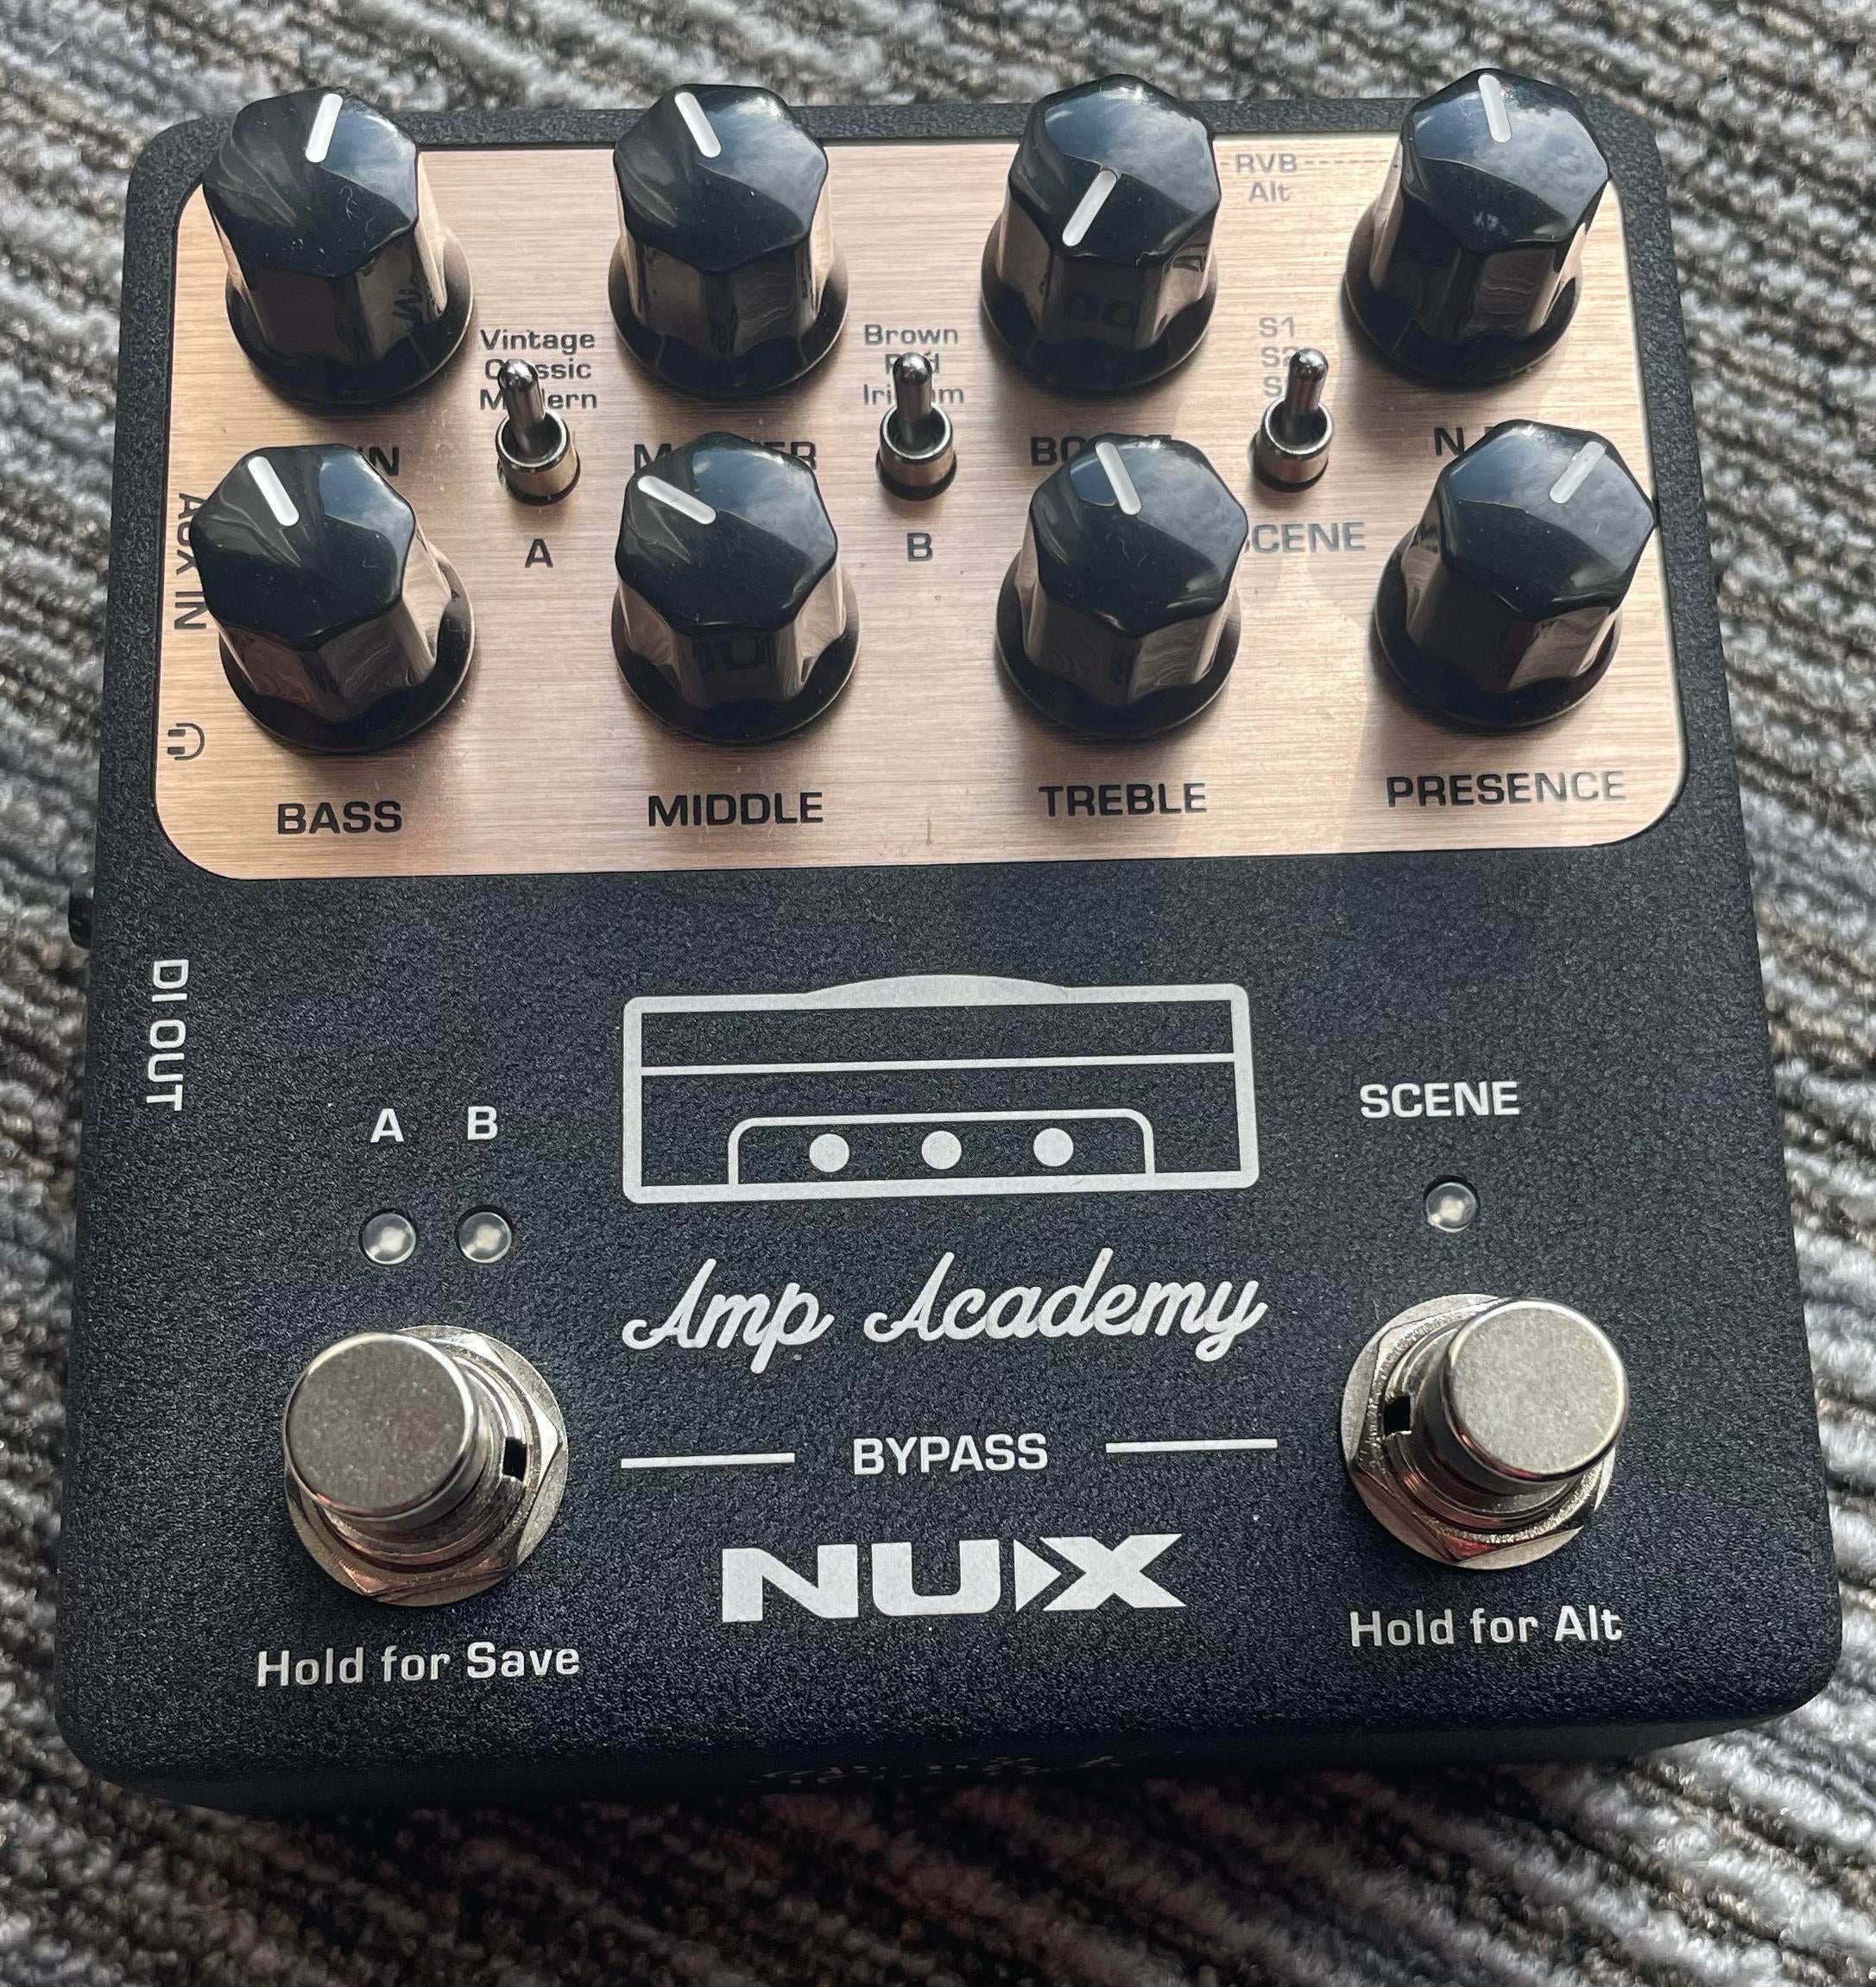 Used NUX Amp Academy - Sweetwater's Gear Exchange